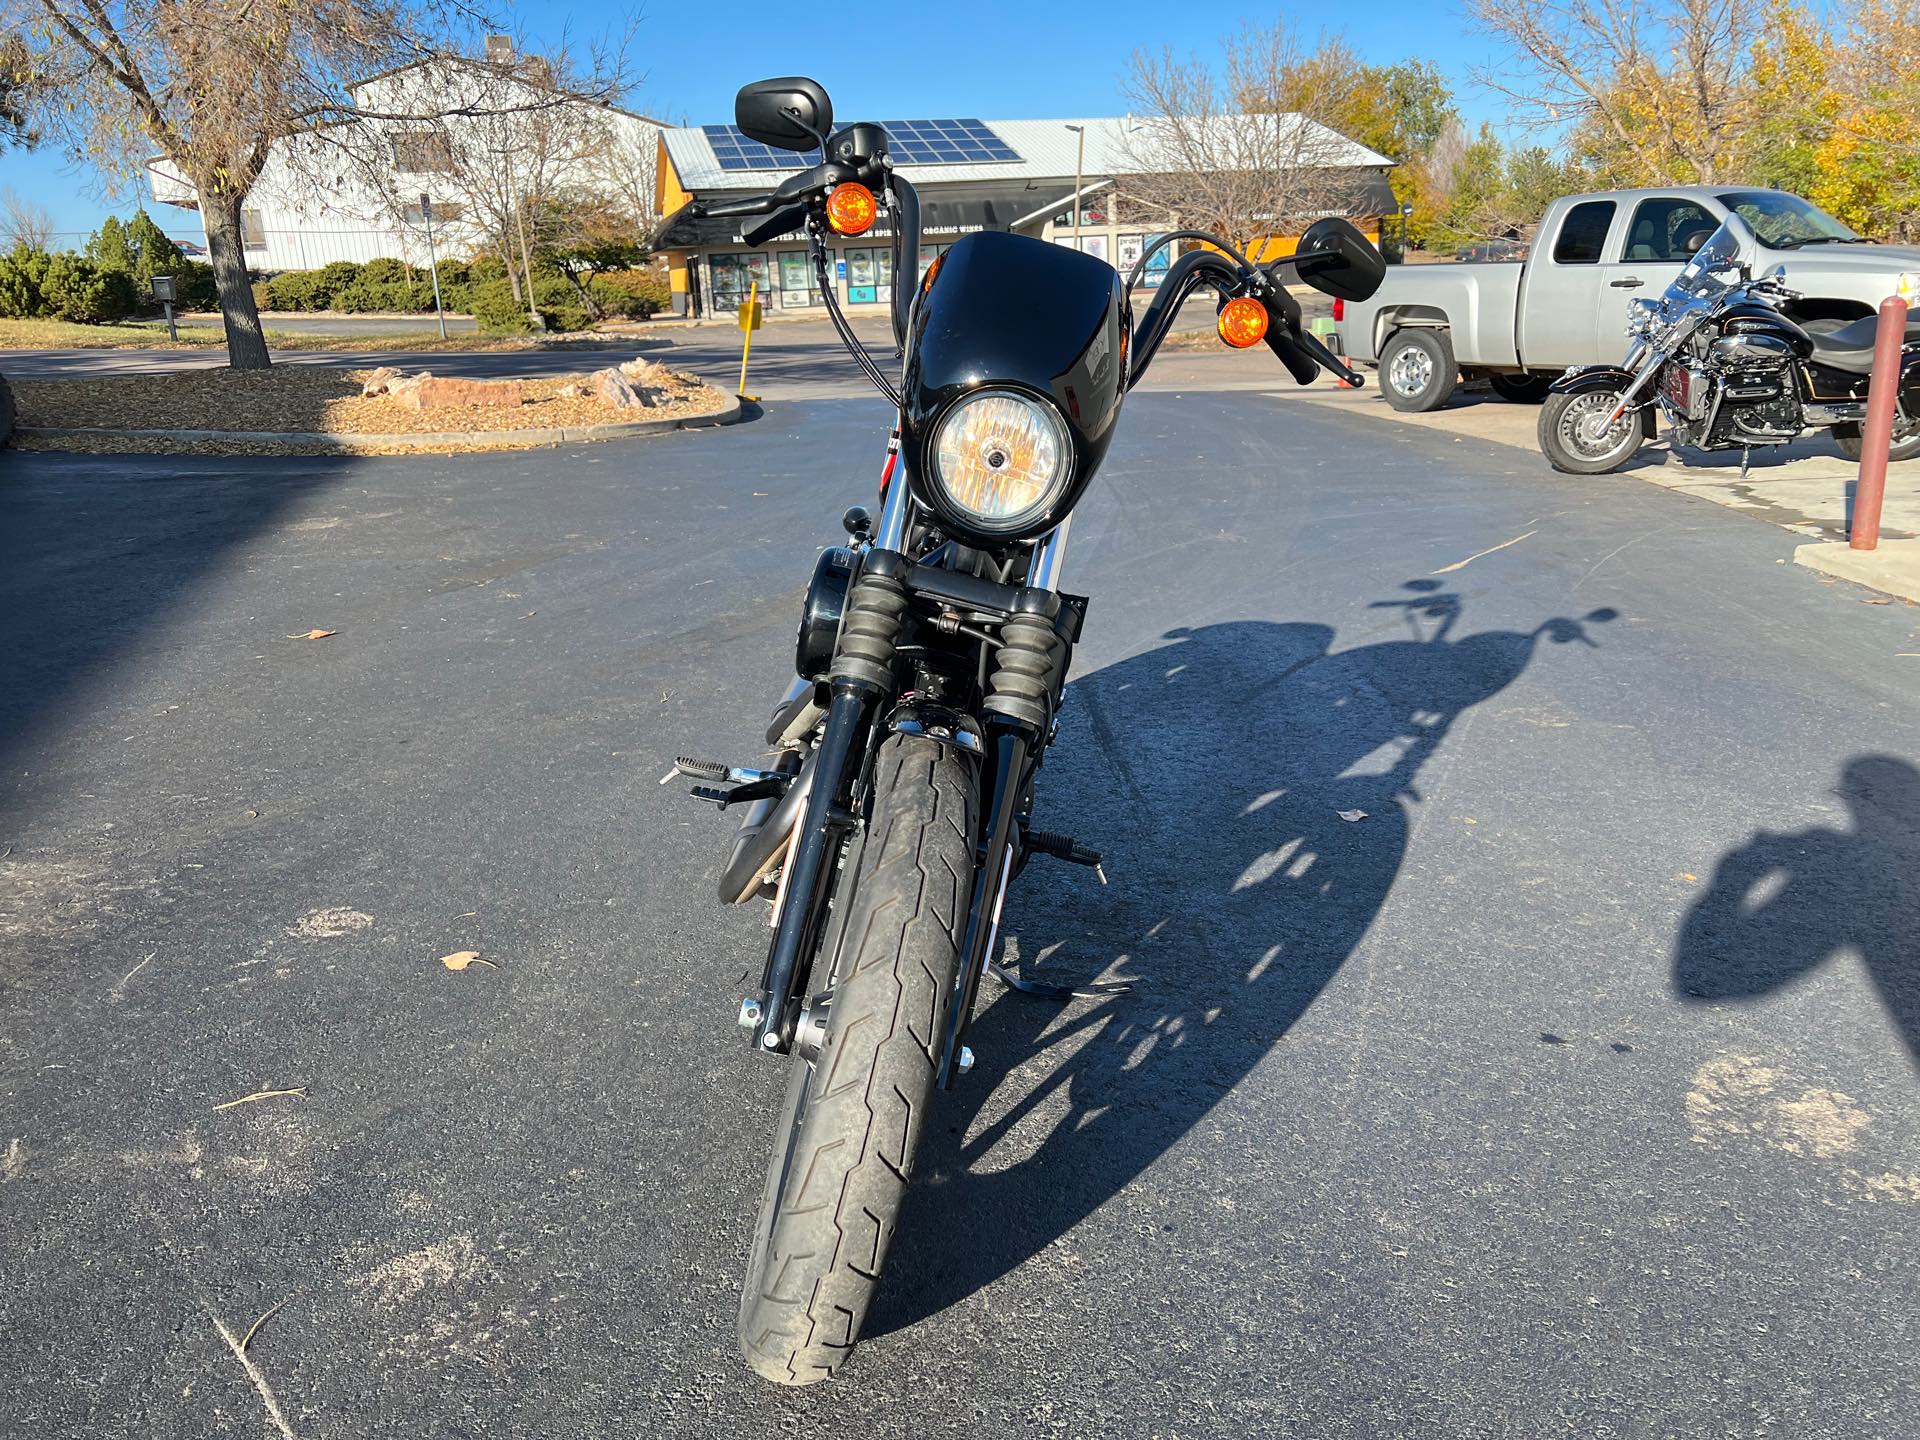 2021 Harley-Davidson Cruiser XL 1200NS Iron 1200 at Aces Motorcycles - Fort Collins